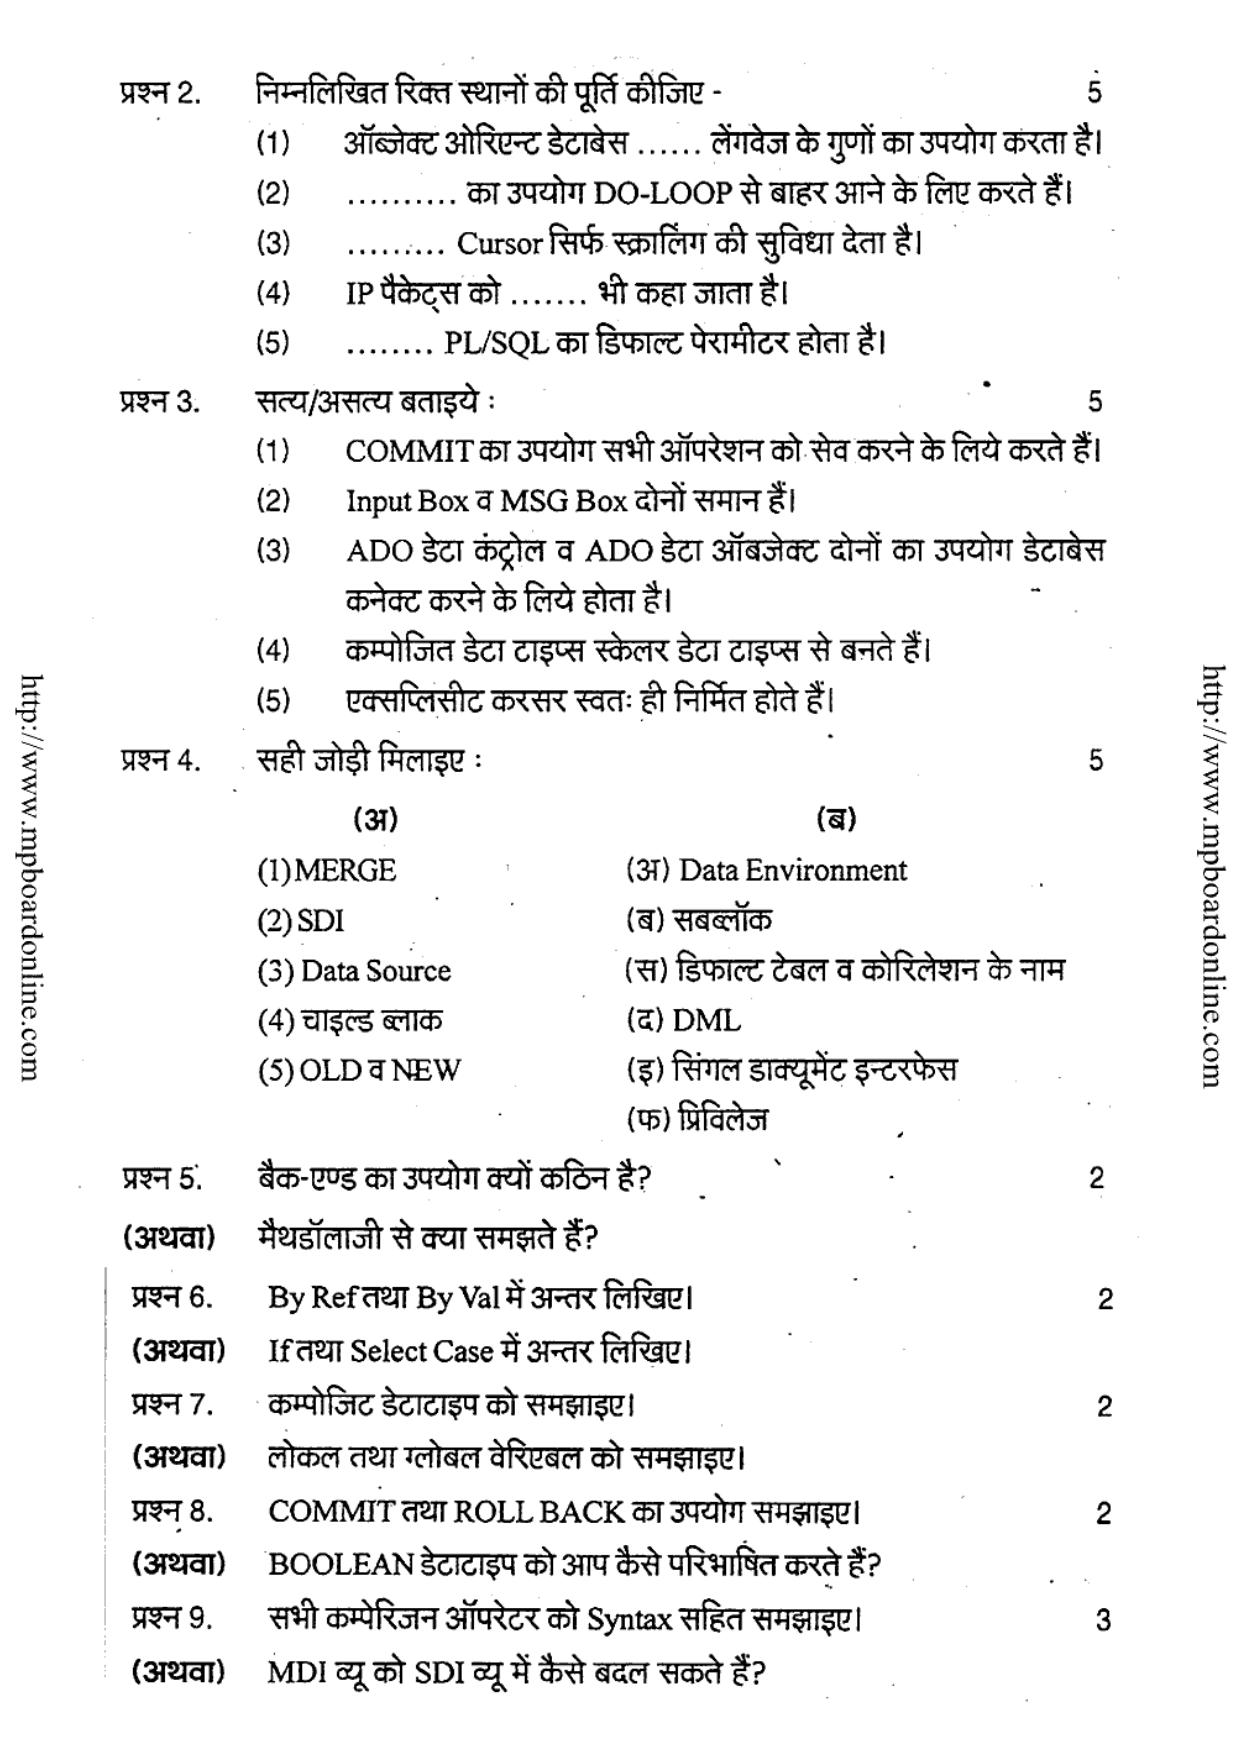 MP Board Class 12 Informatics Practices 2018 Question Paper - Page 2